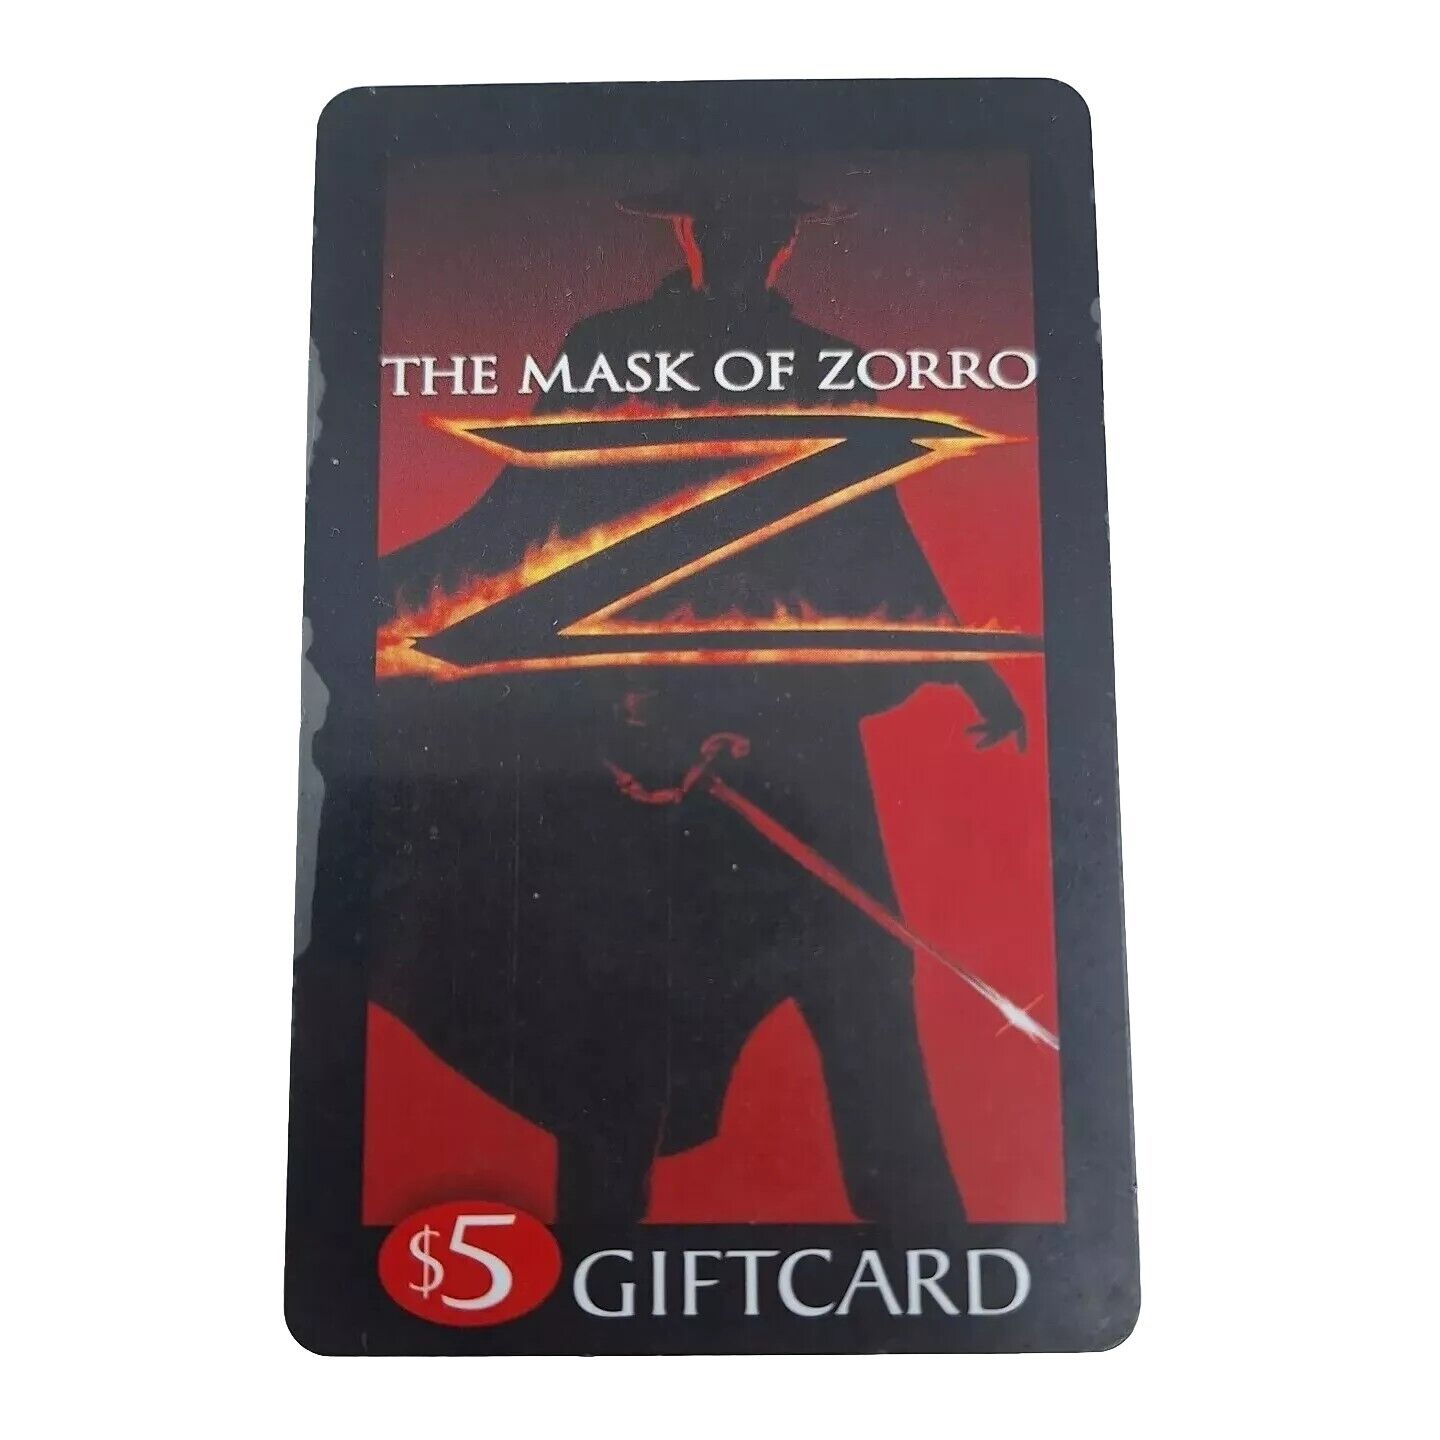 Blockbuster MASK OF ZORO Gift Card No Value Promo Promotional Giveaway 1998